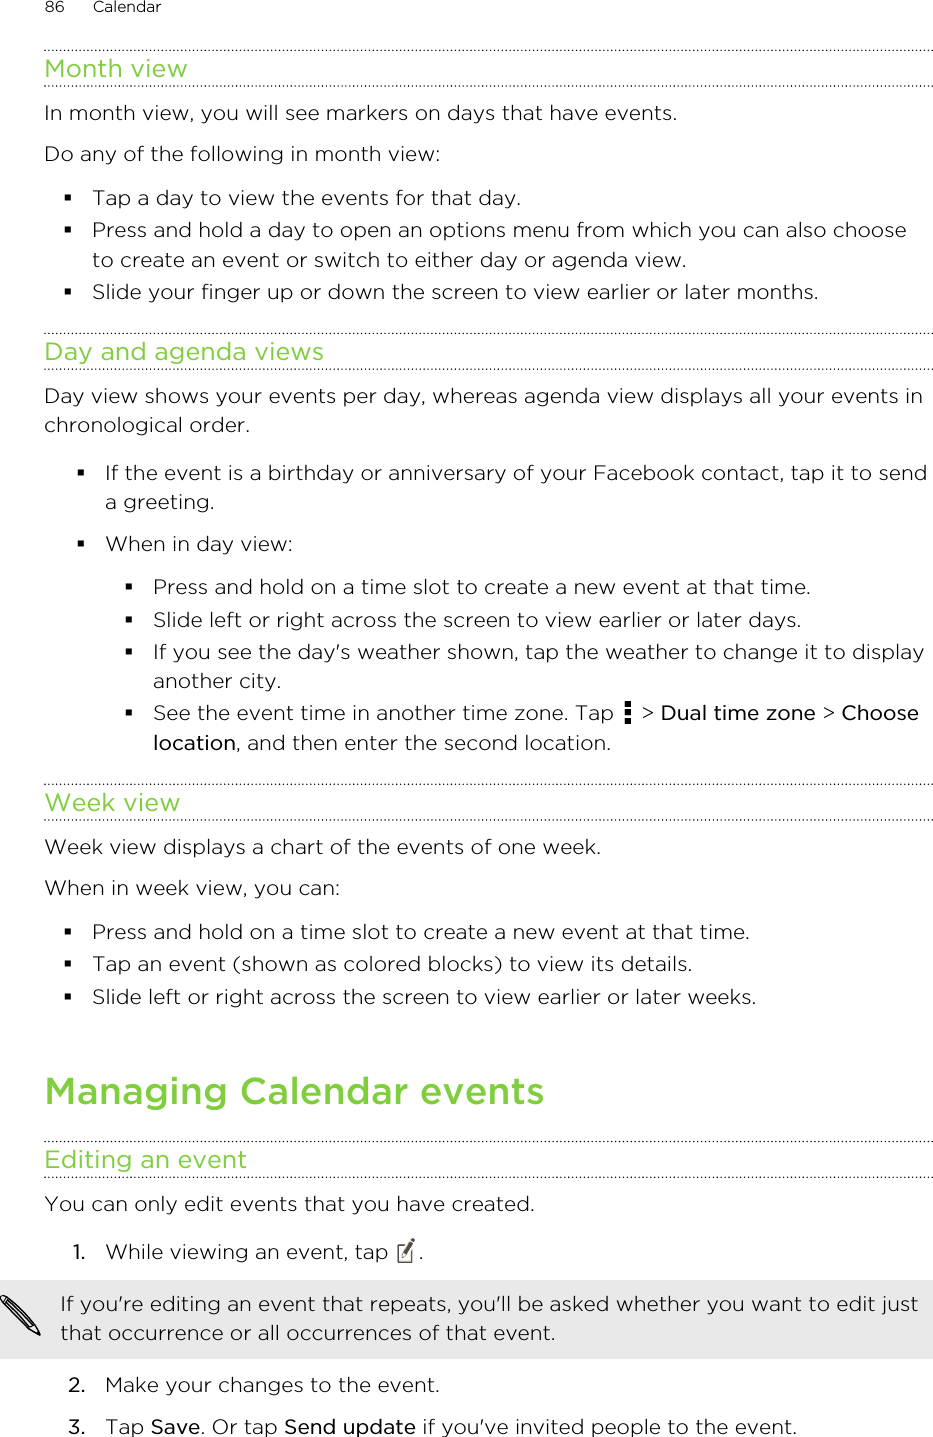 Month viewIn month view, you will see markers on days that have events.Do any of the following in month view:§Tap a day to view the events for that day.§Press and hold a day to open an options menu from which you can also chooseto create an event or switch to either day or agenda view.§Slide your finger up or down the screen to view earlier or later months.Day and agenda viewsDay view shows your events per day, whereas agenda view displays all your events inchronological order.§If the event is a birthday or anniversary of your Facebook contact, tap it to senda greeting.§When in day view:§Press and hold on a time slot to create a new event at that time.§Slide left or right across the screen to view earlier or later days.§If you see the day&apos;s weather shown, tap the weather to change it to displayanother city.§See the event time in another time zone. Tap   &gt; Dual time zone &gt; Chooselocation, and then enter the second location.Week viewWeek view displays a chart of the events of one week.When in week view, you can:§Press and hold on a time slot to create a new event at that time.§Tap an event (shown as colored blocks) to view its details.§Slide left or right across the screen to view earlier or later weeks.Managing Calendar eventsEditing an eventYou can only edit events that you have created.1. While viewing an event, tap  . If you&apos;re editing an event that repeats, you&apos;ll be asked whether you want to edit justthat occurrence or all occurrences of that event.2. Make your changes to the event.3. Tap Save. Or tap Send update if you&apos;ve invited people to the event.86 Calendar